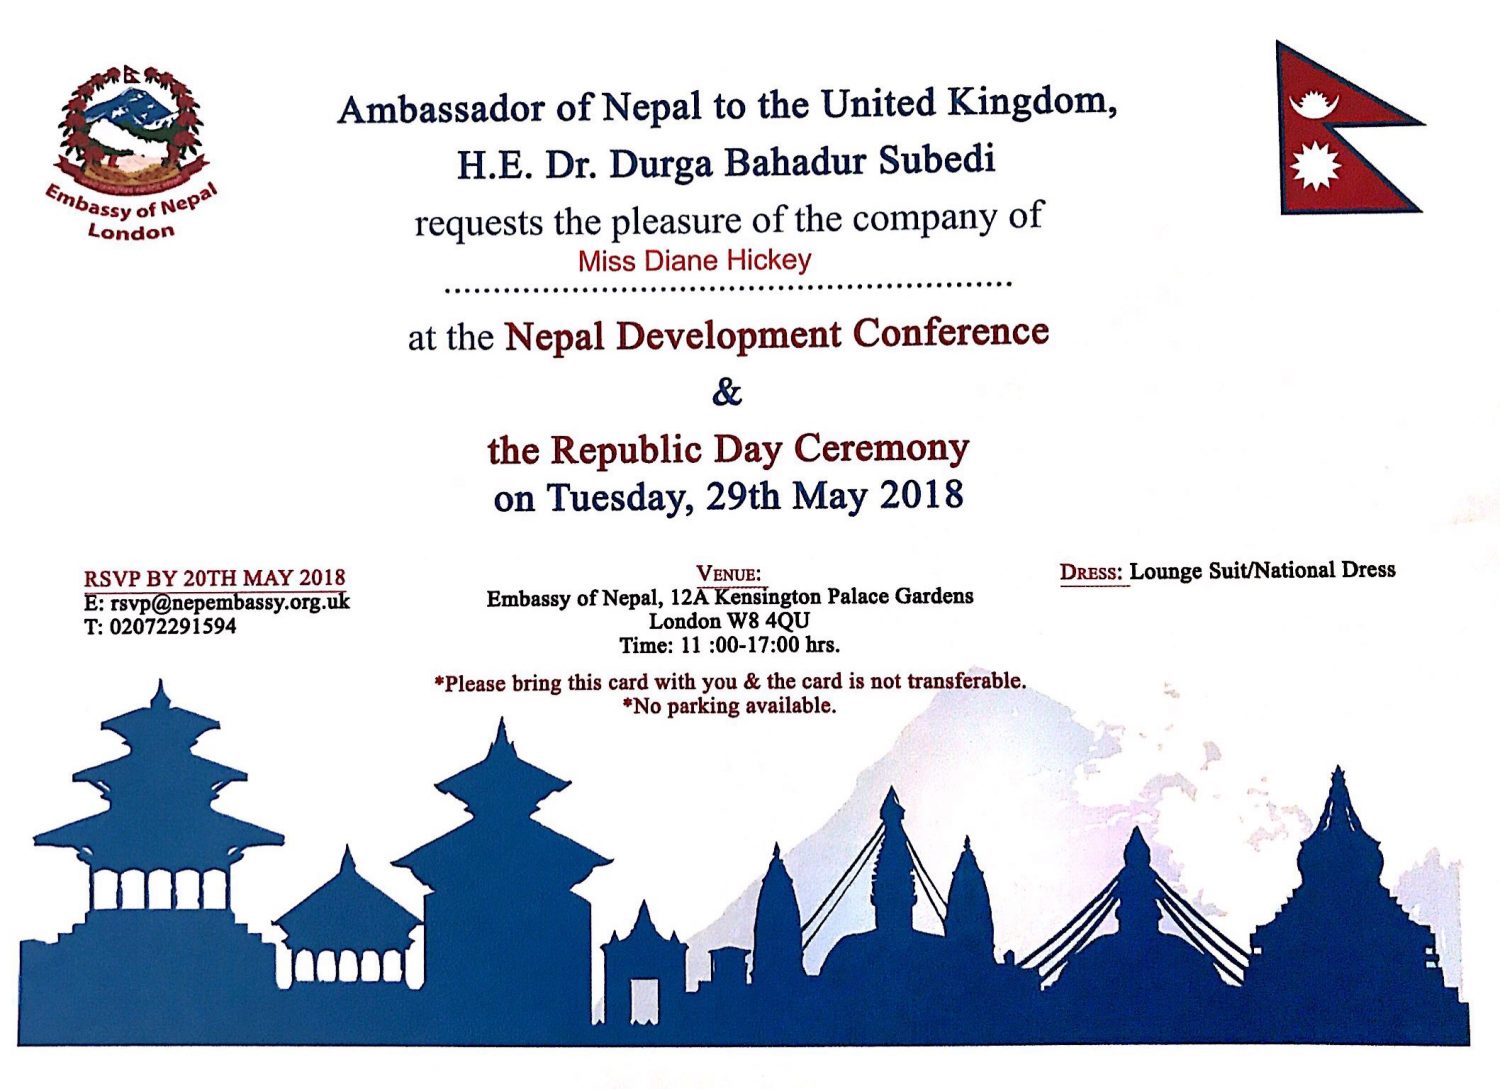 The Republic Day Ceremony and Nepal Development Conference